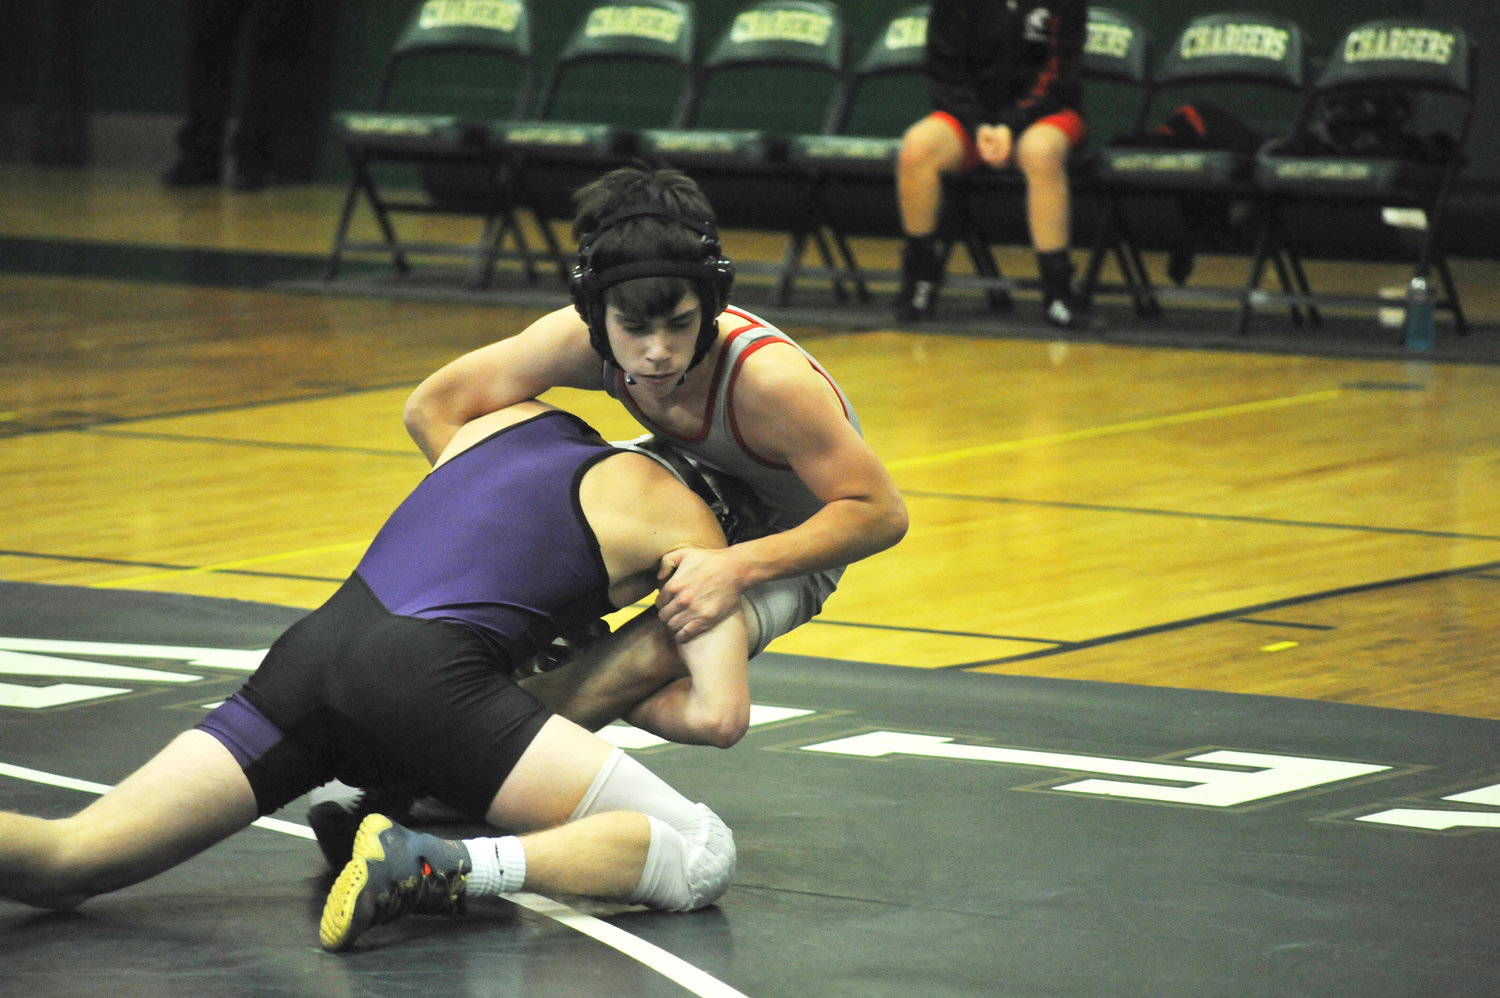 In the Battle of Chatham County Wrestling event at Northwood High in Pittsboro in 2019, Chatham Charter’s Chandler Steel takes down Chatham Central’s Hunter Bray in competition. Steel’s pin of Bray stopped the match with an automatic win.